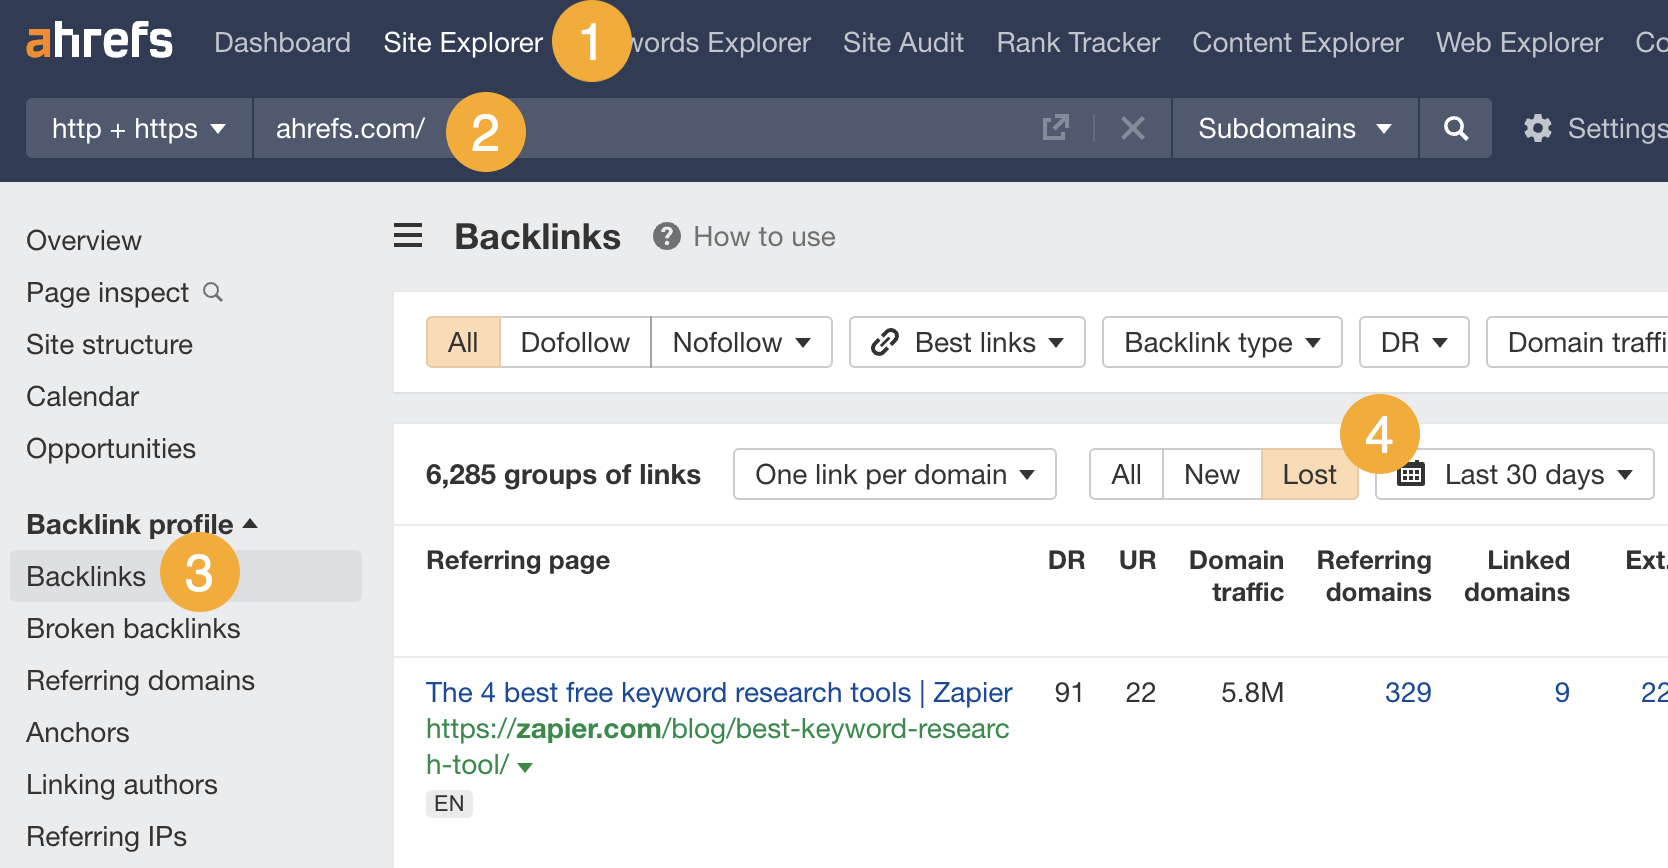 Finding lost backlinks in Ahrefs' Site Explorer